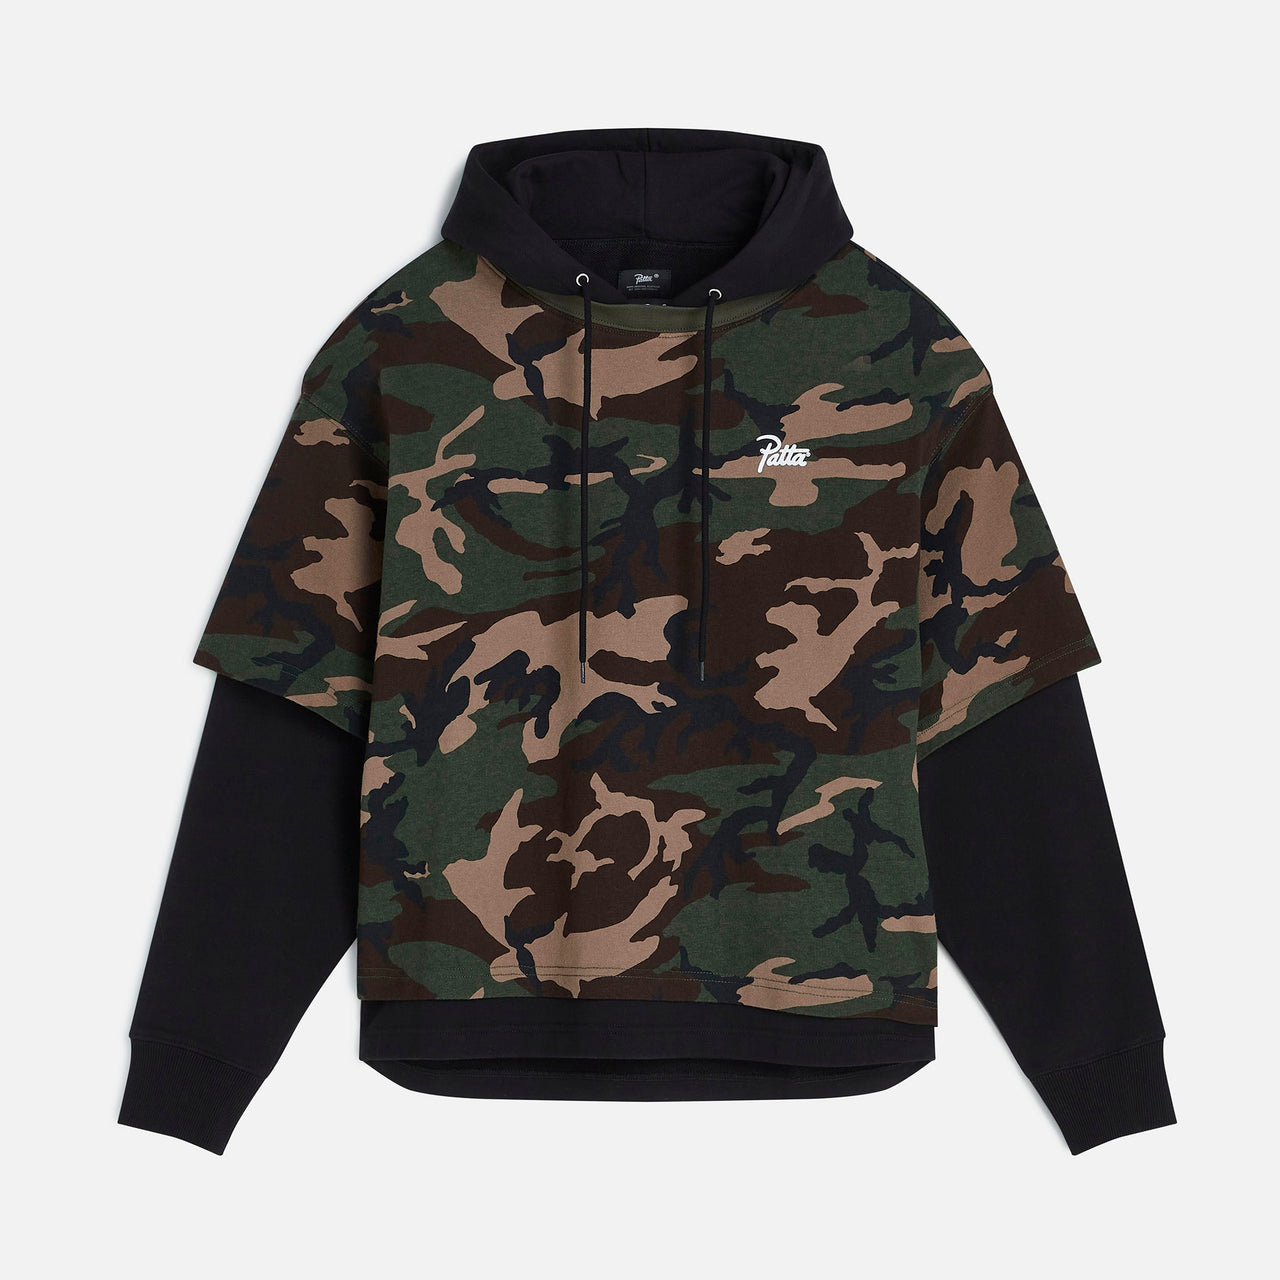 Patta Always On Top Hooded Sweater